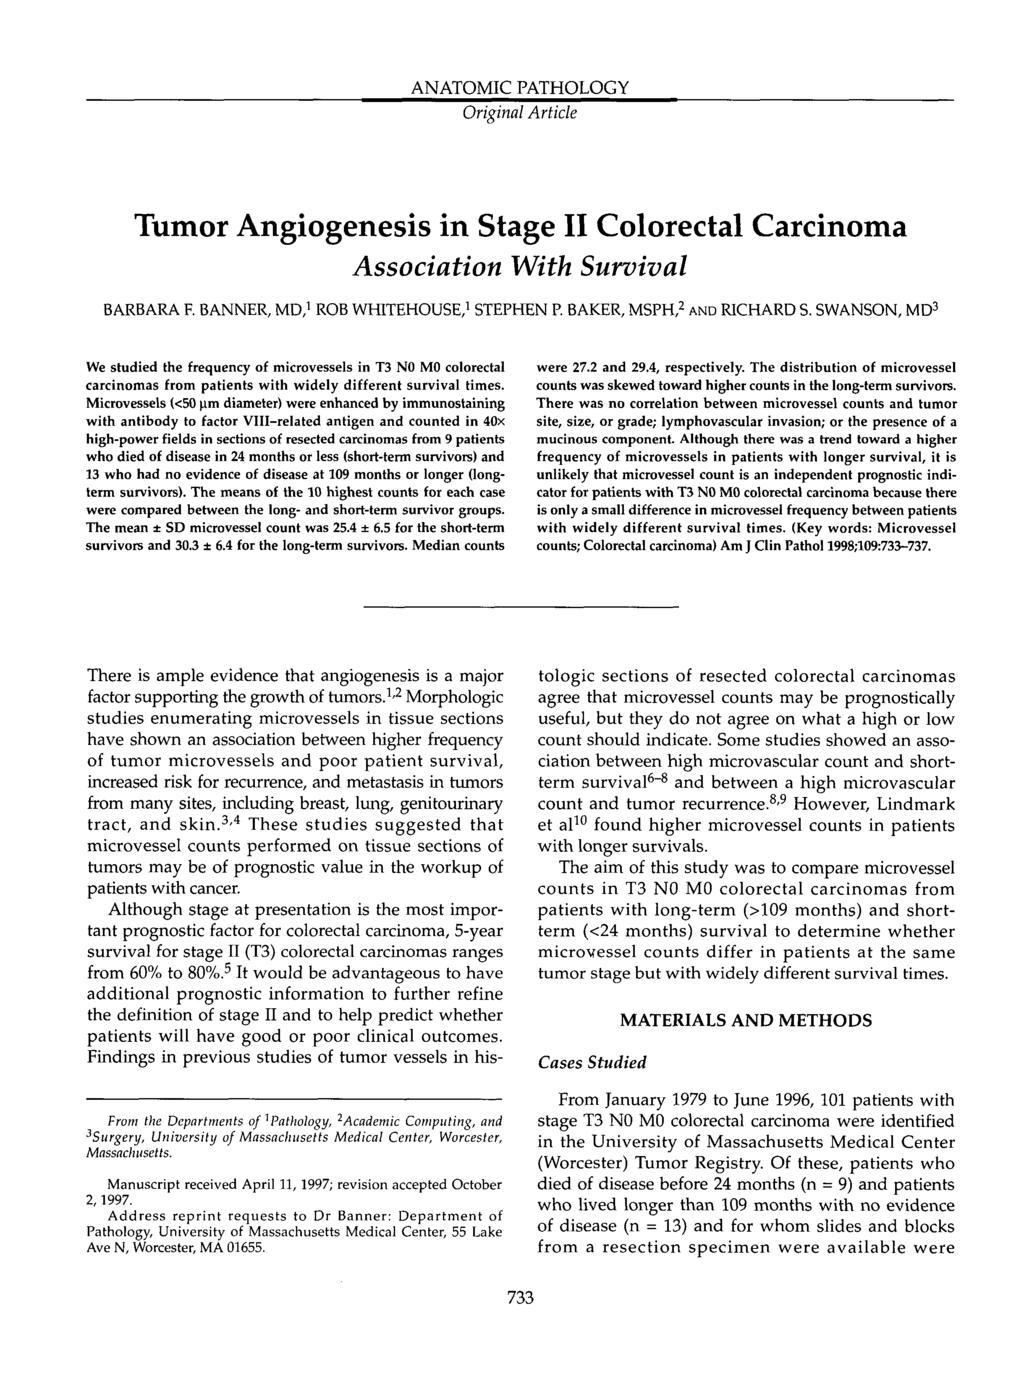 ANATOMIC PATHOLOGY Original Article Tumor Angiogenesis in Stage II Carcinoma Association With Survival BARBARA F. BANNER, MD, ROB WHITEHOUSE, STEPHEN P. BAKER, MSPH, AND RICHARD S.